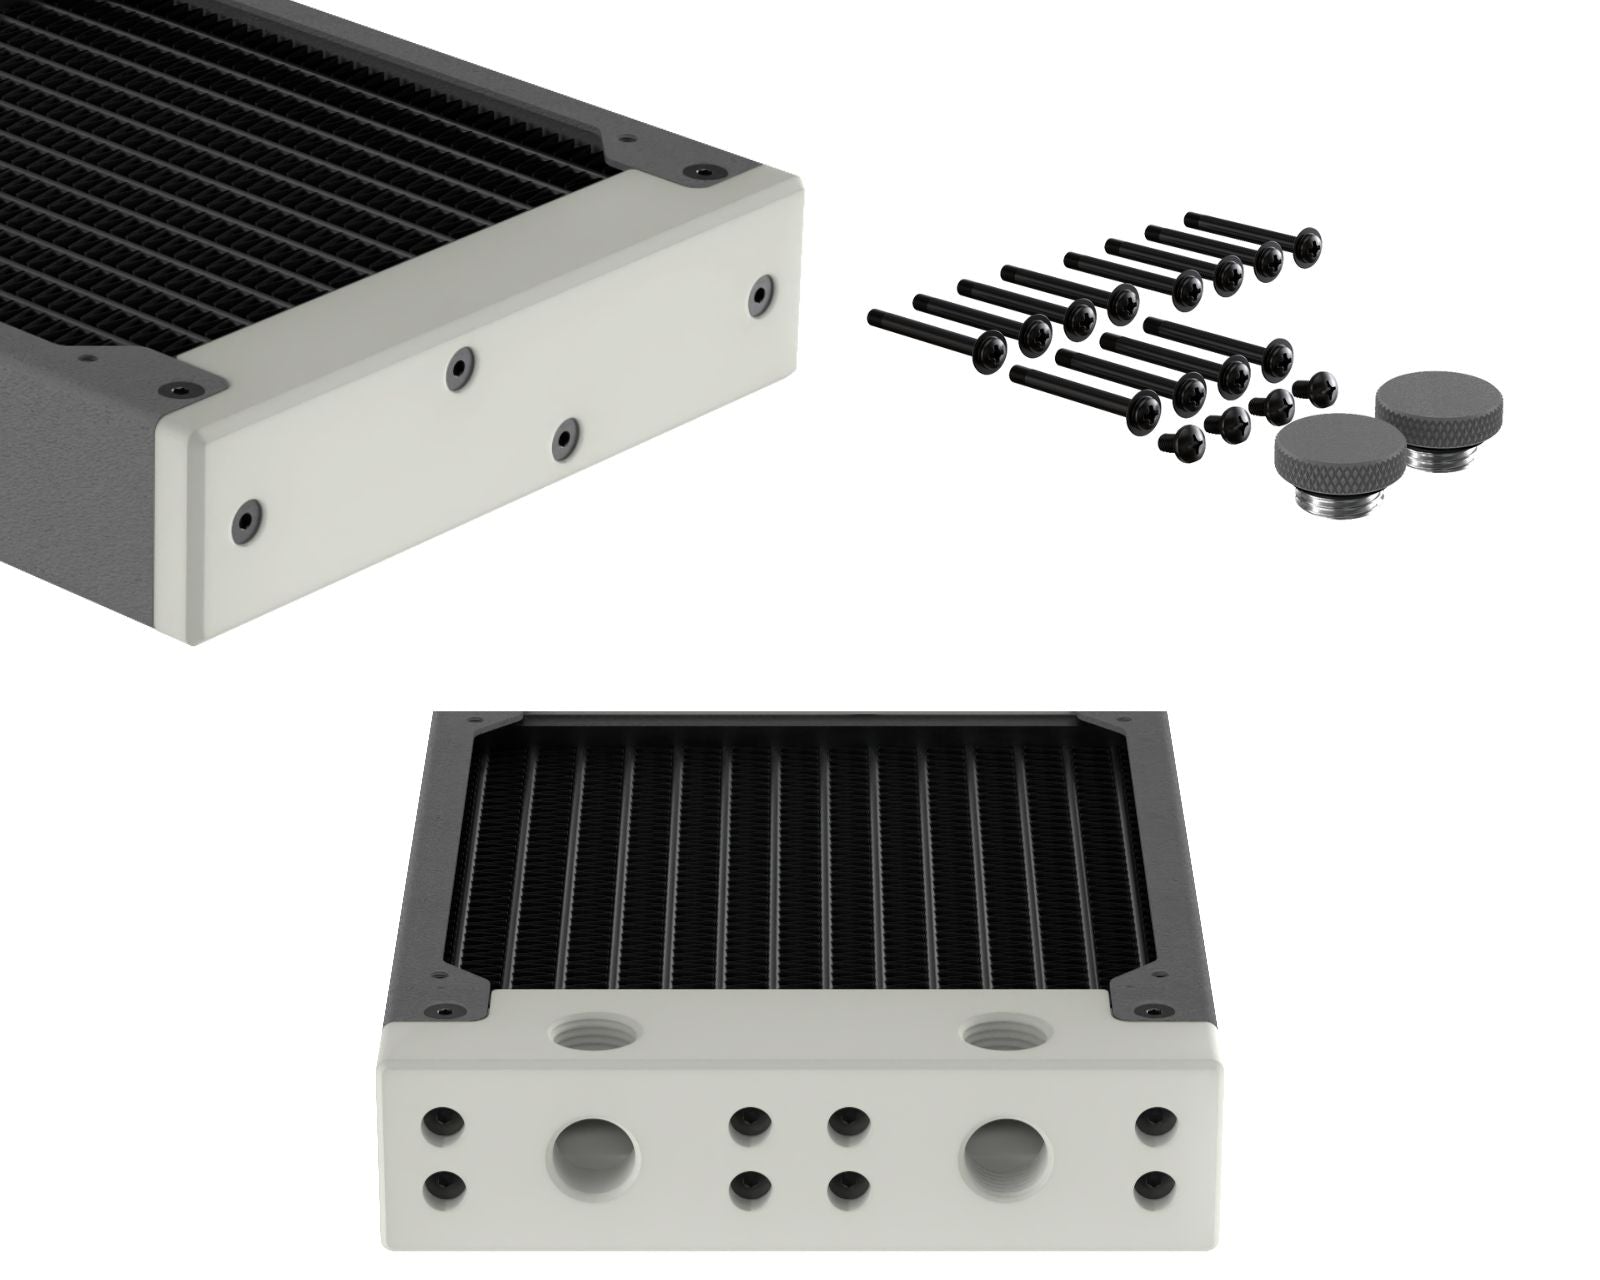 PrimoChill 360SL (30mm) EXIMO Modular Radiator, White POM, 3x120mm, Triple Fan (R-SL-W36) Available in 20+ Colors, Assembled in USA and Custom Watercooling Loop Ready - TX Matte Gun Metal